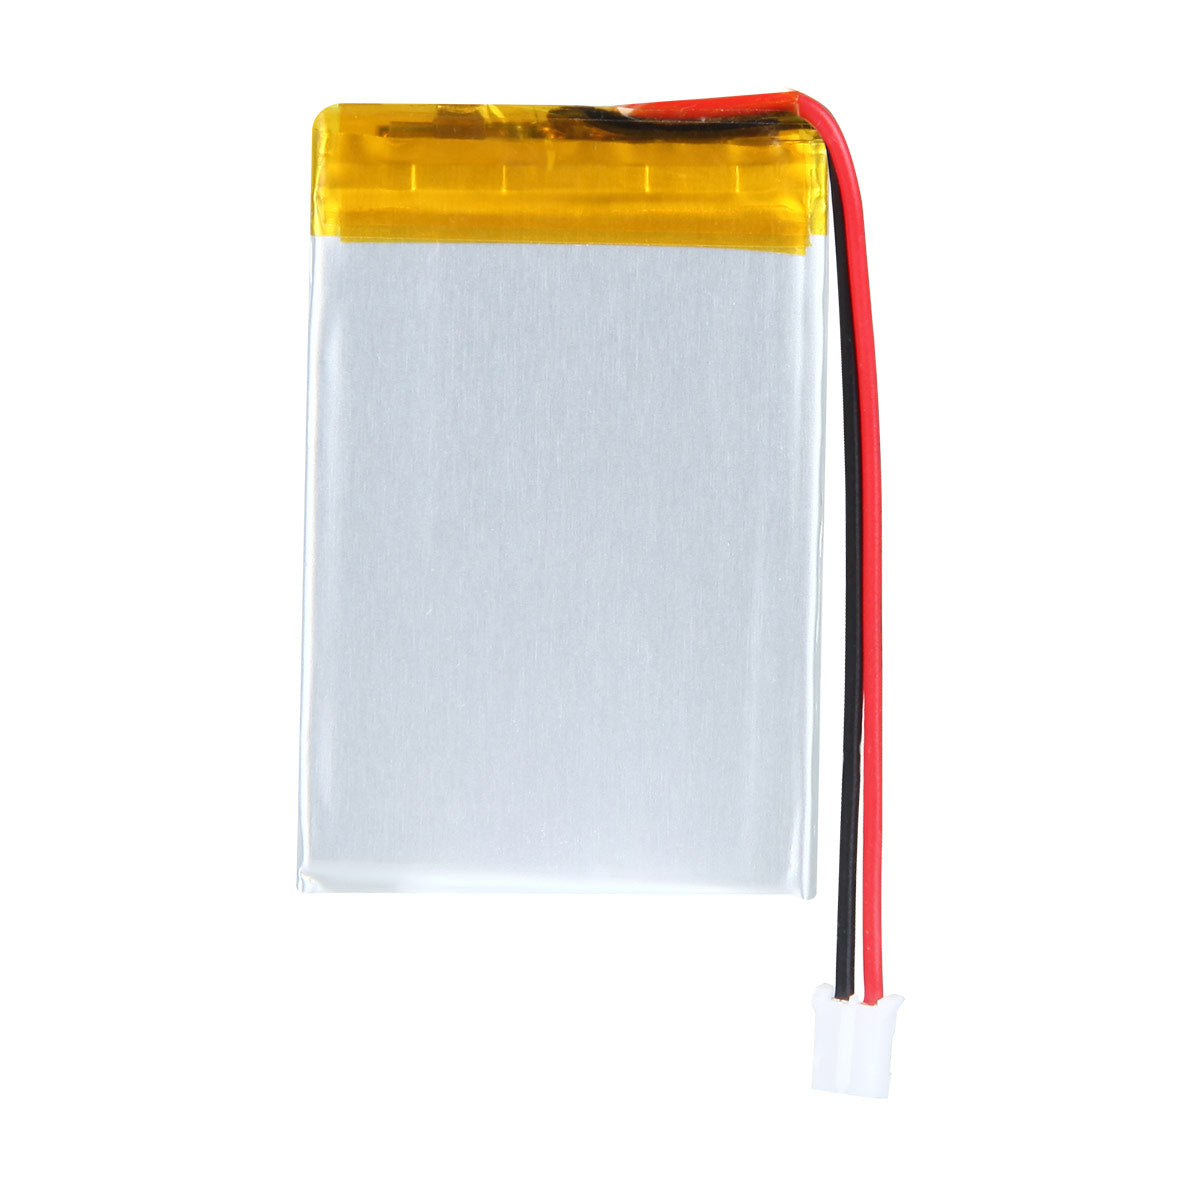 YDL 3.7V 700mAh 423448 Rechargeable Lipo Battery with JST Connector - YDL Battery